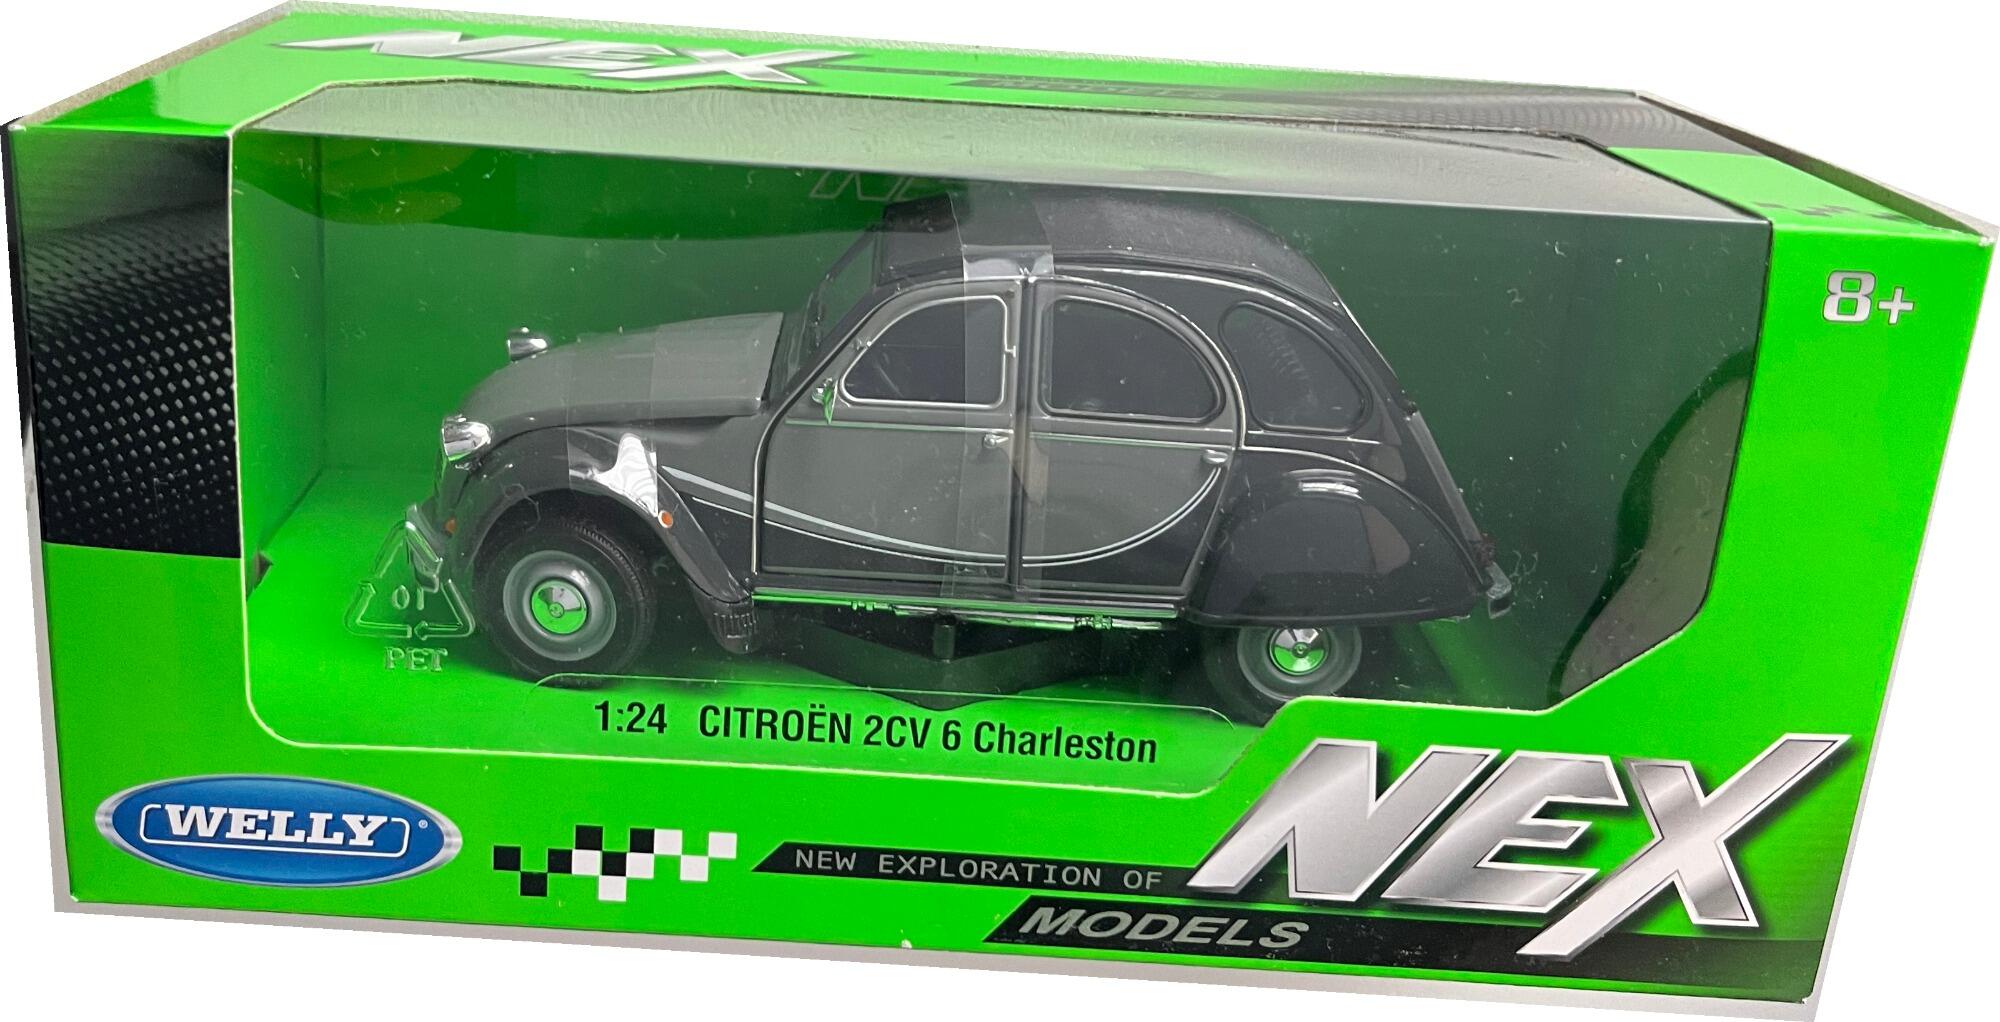 Citroen 2CV 6 Charleston 1982 in grey and black, 1:24 scale diecast car  model from Welly, 24009